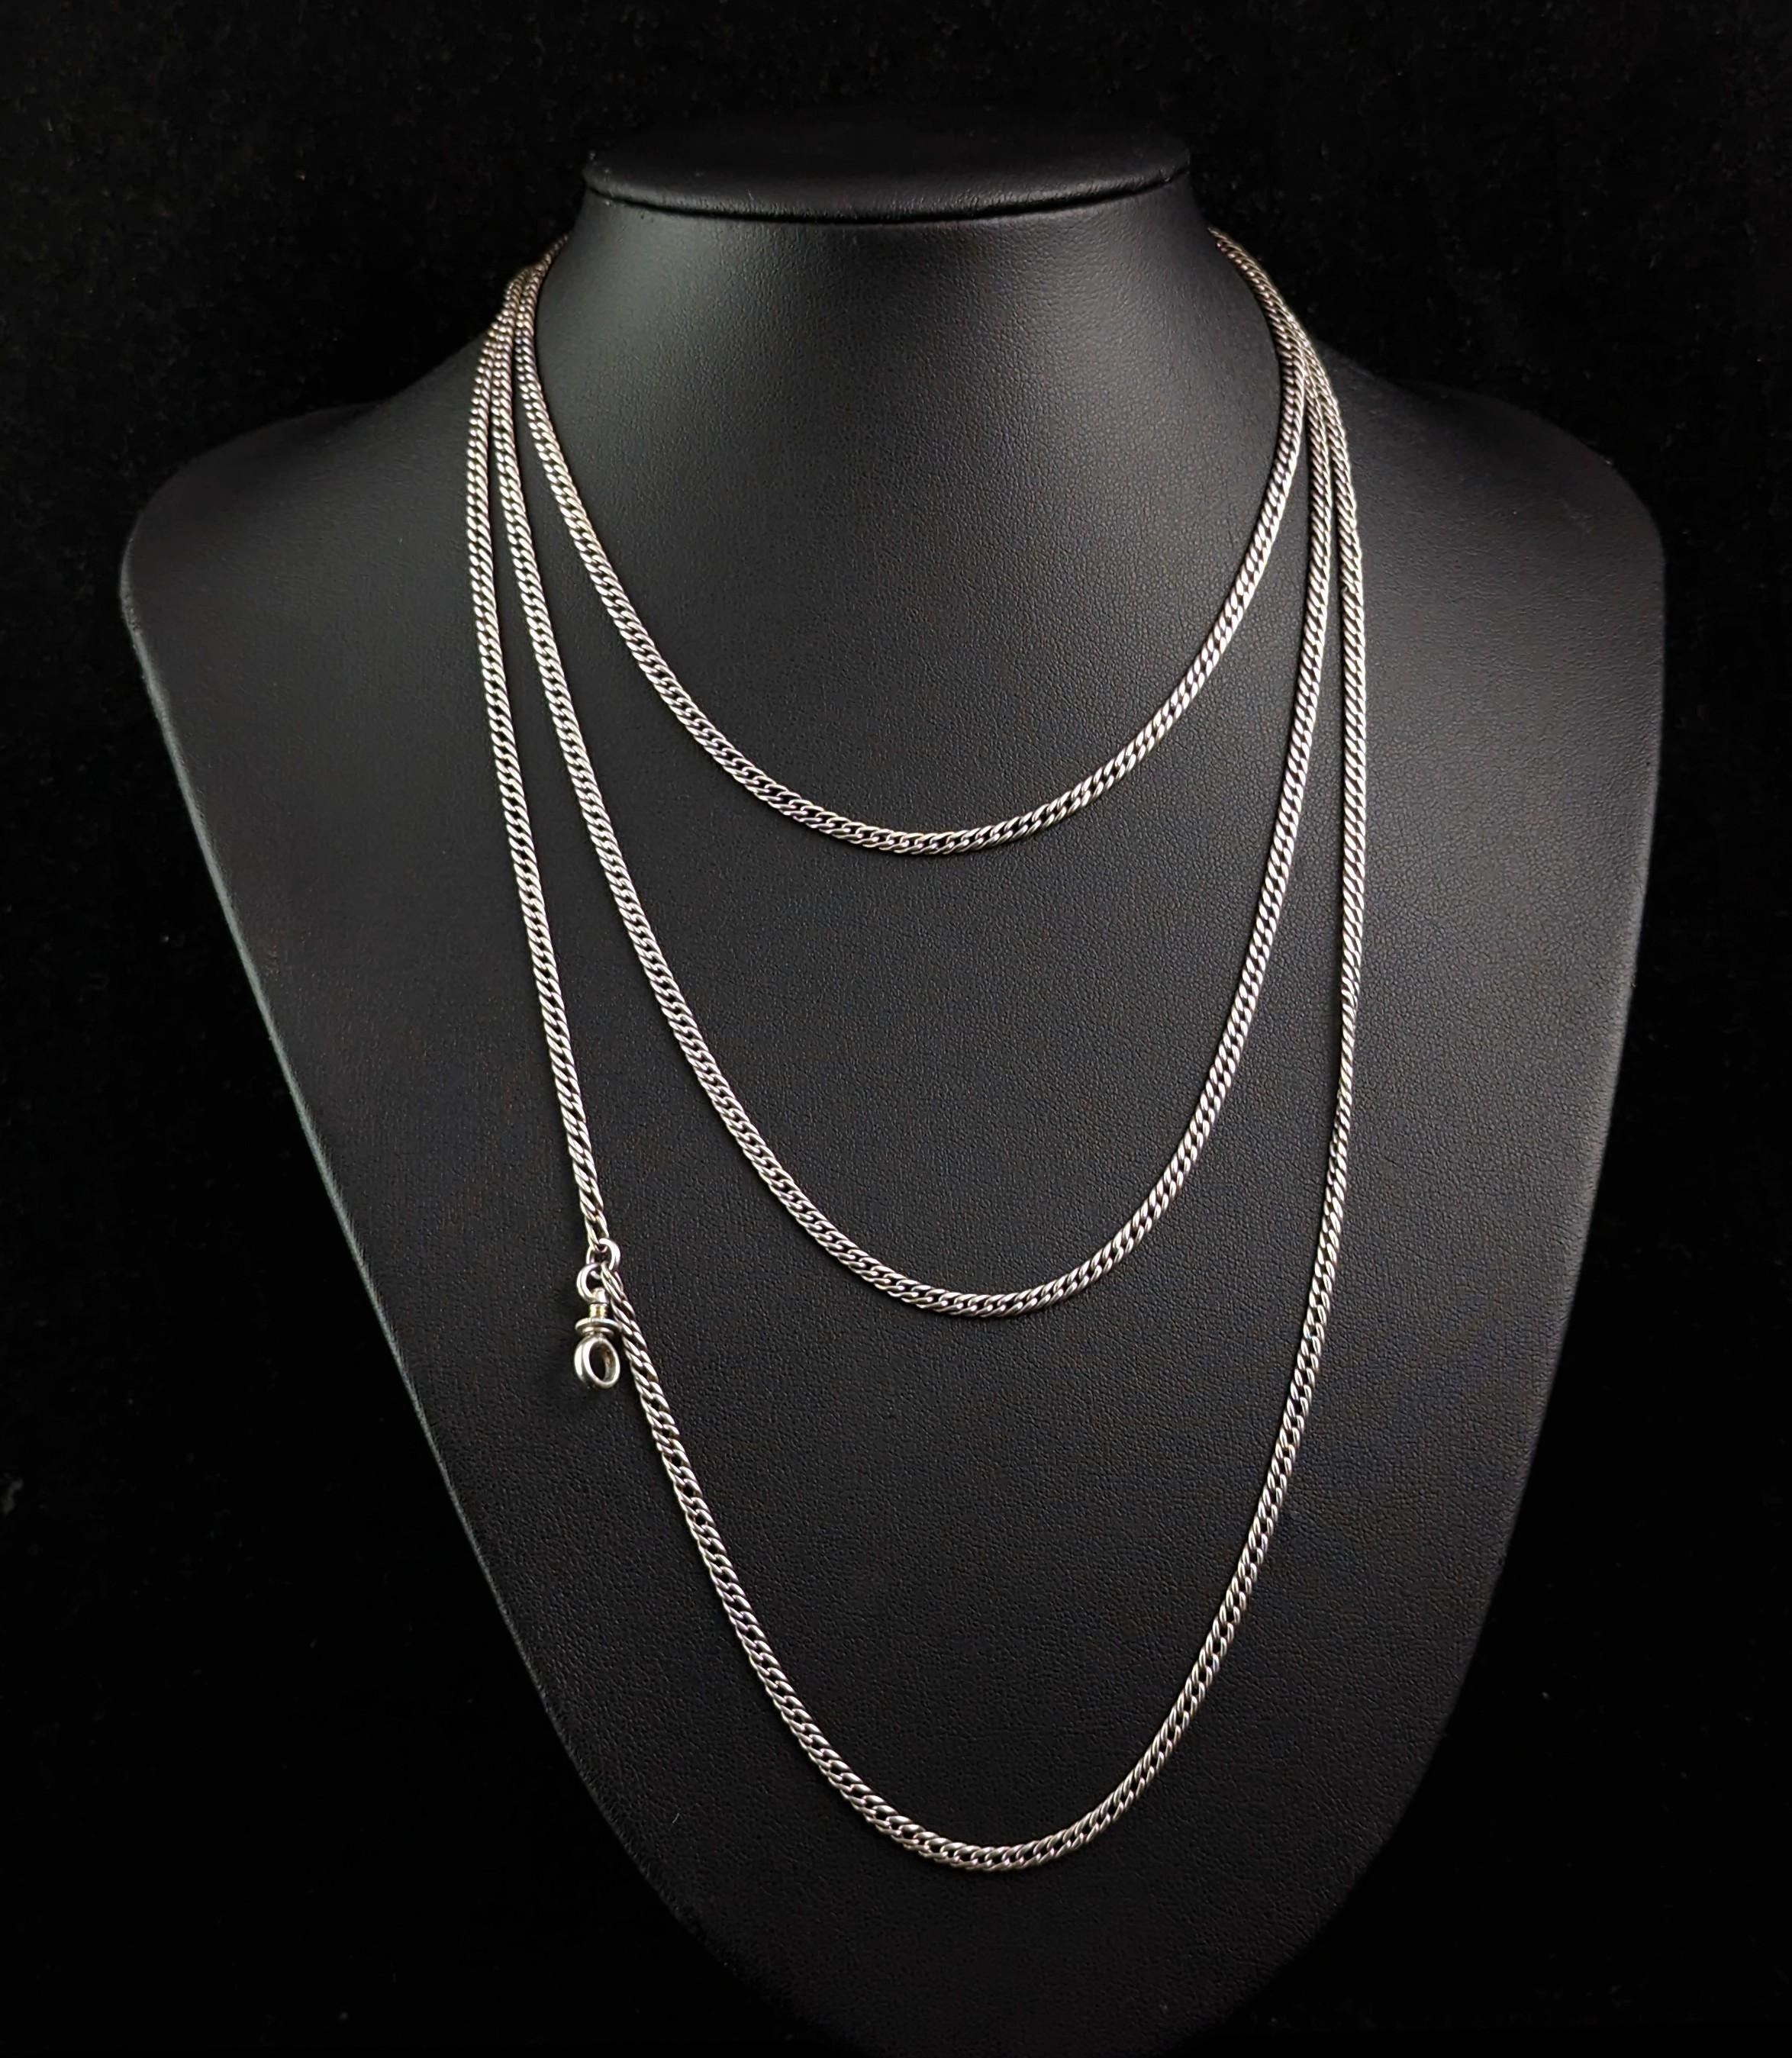 This gorgeous antique silver long chain or longuard chain necklace is everything you could hope for in a long chain.

It is a lovely long length chain at 58